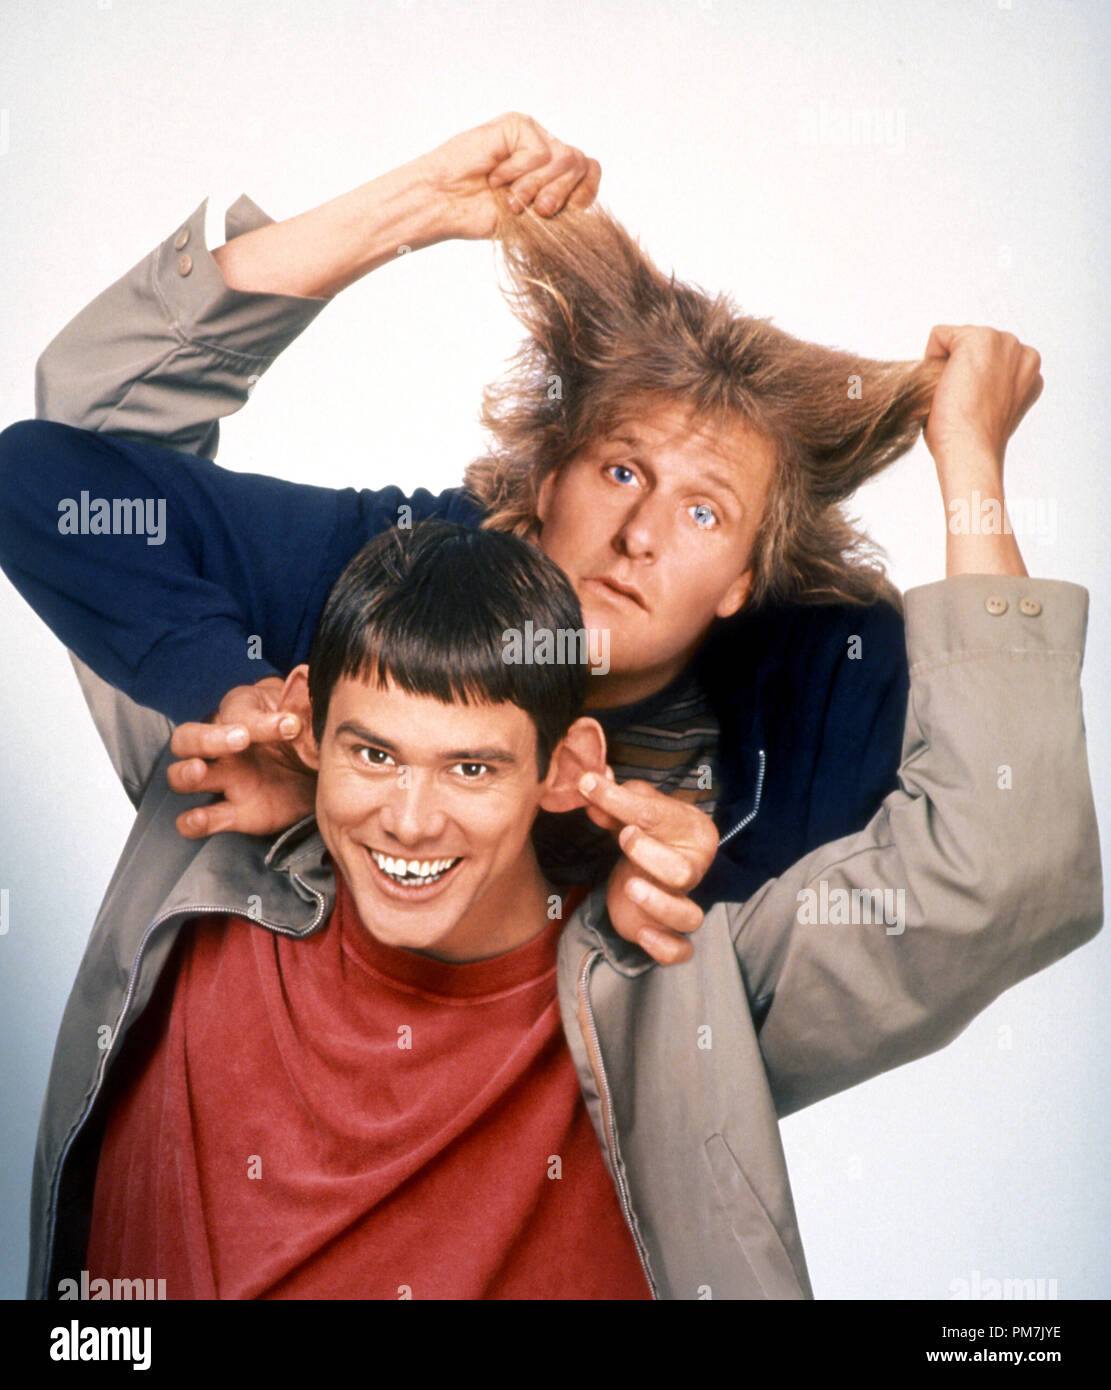 Film Still from 'Dumb and Dumber' Jim Carrey, Jeff Daniels © 1994 New Line Cinema     File Reference # 31129367THA  For Editorial Use Only - All Rights Reserved Stock Photo